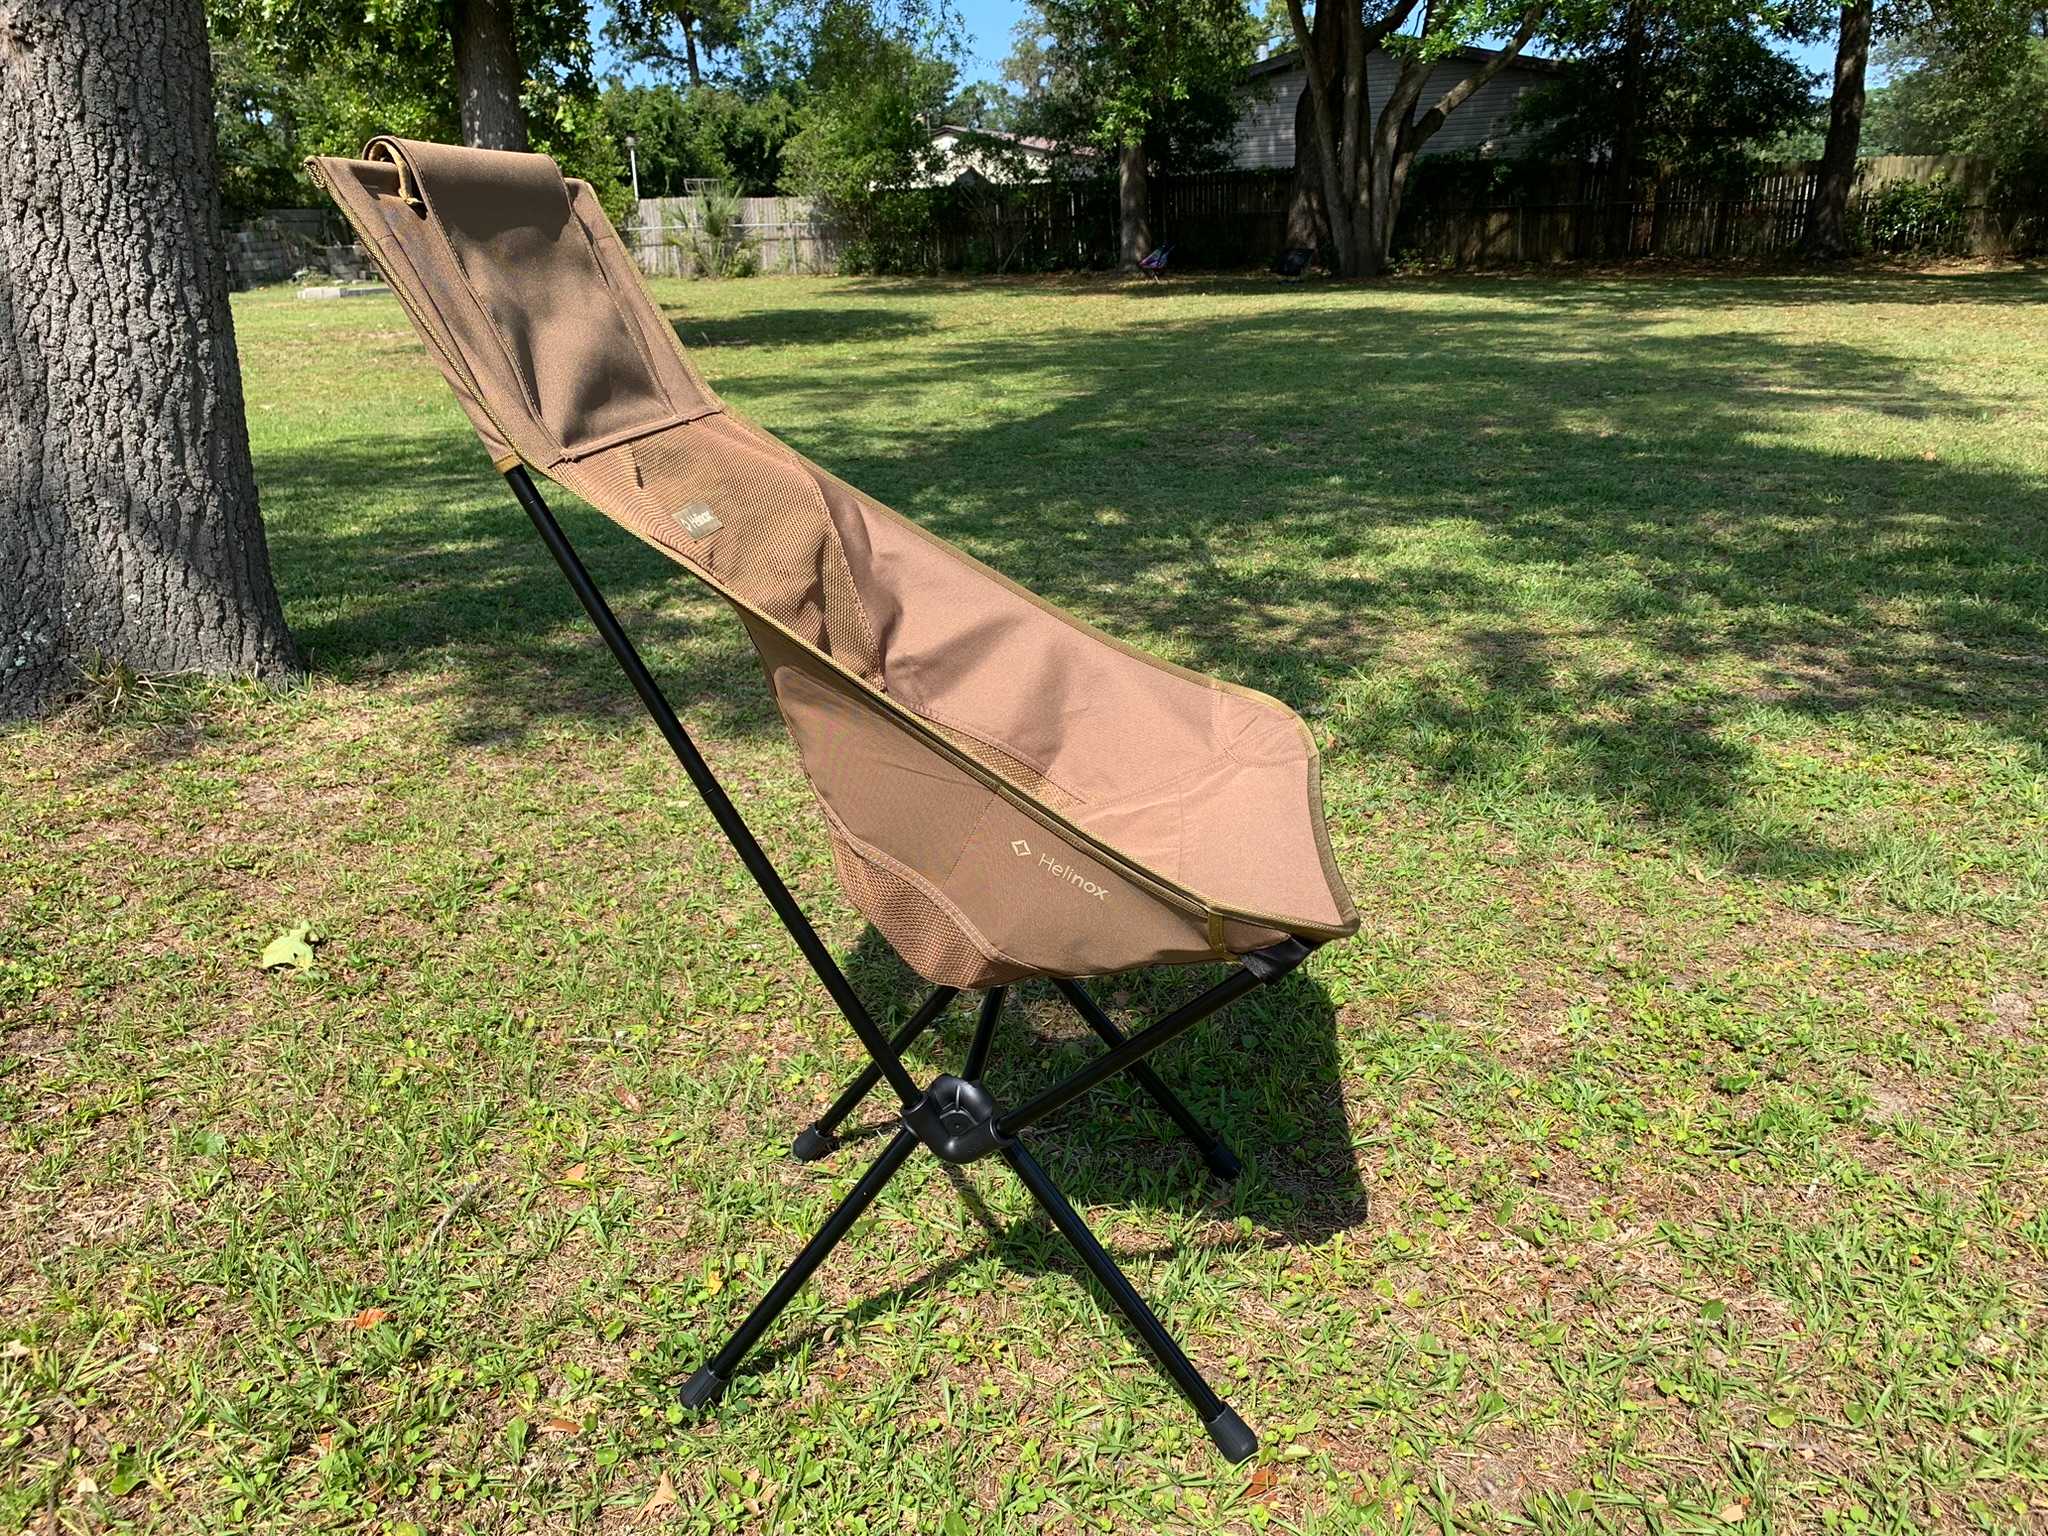 What is this clip on the side of my camp chair for? It's too small